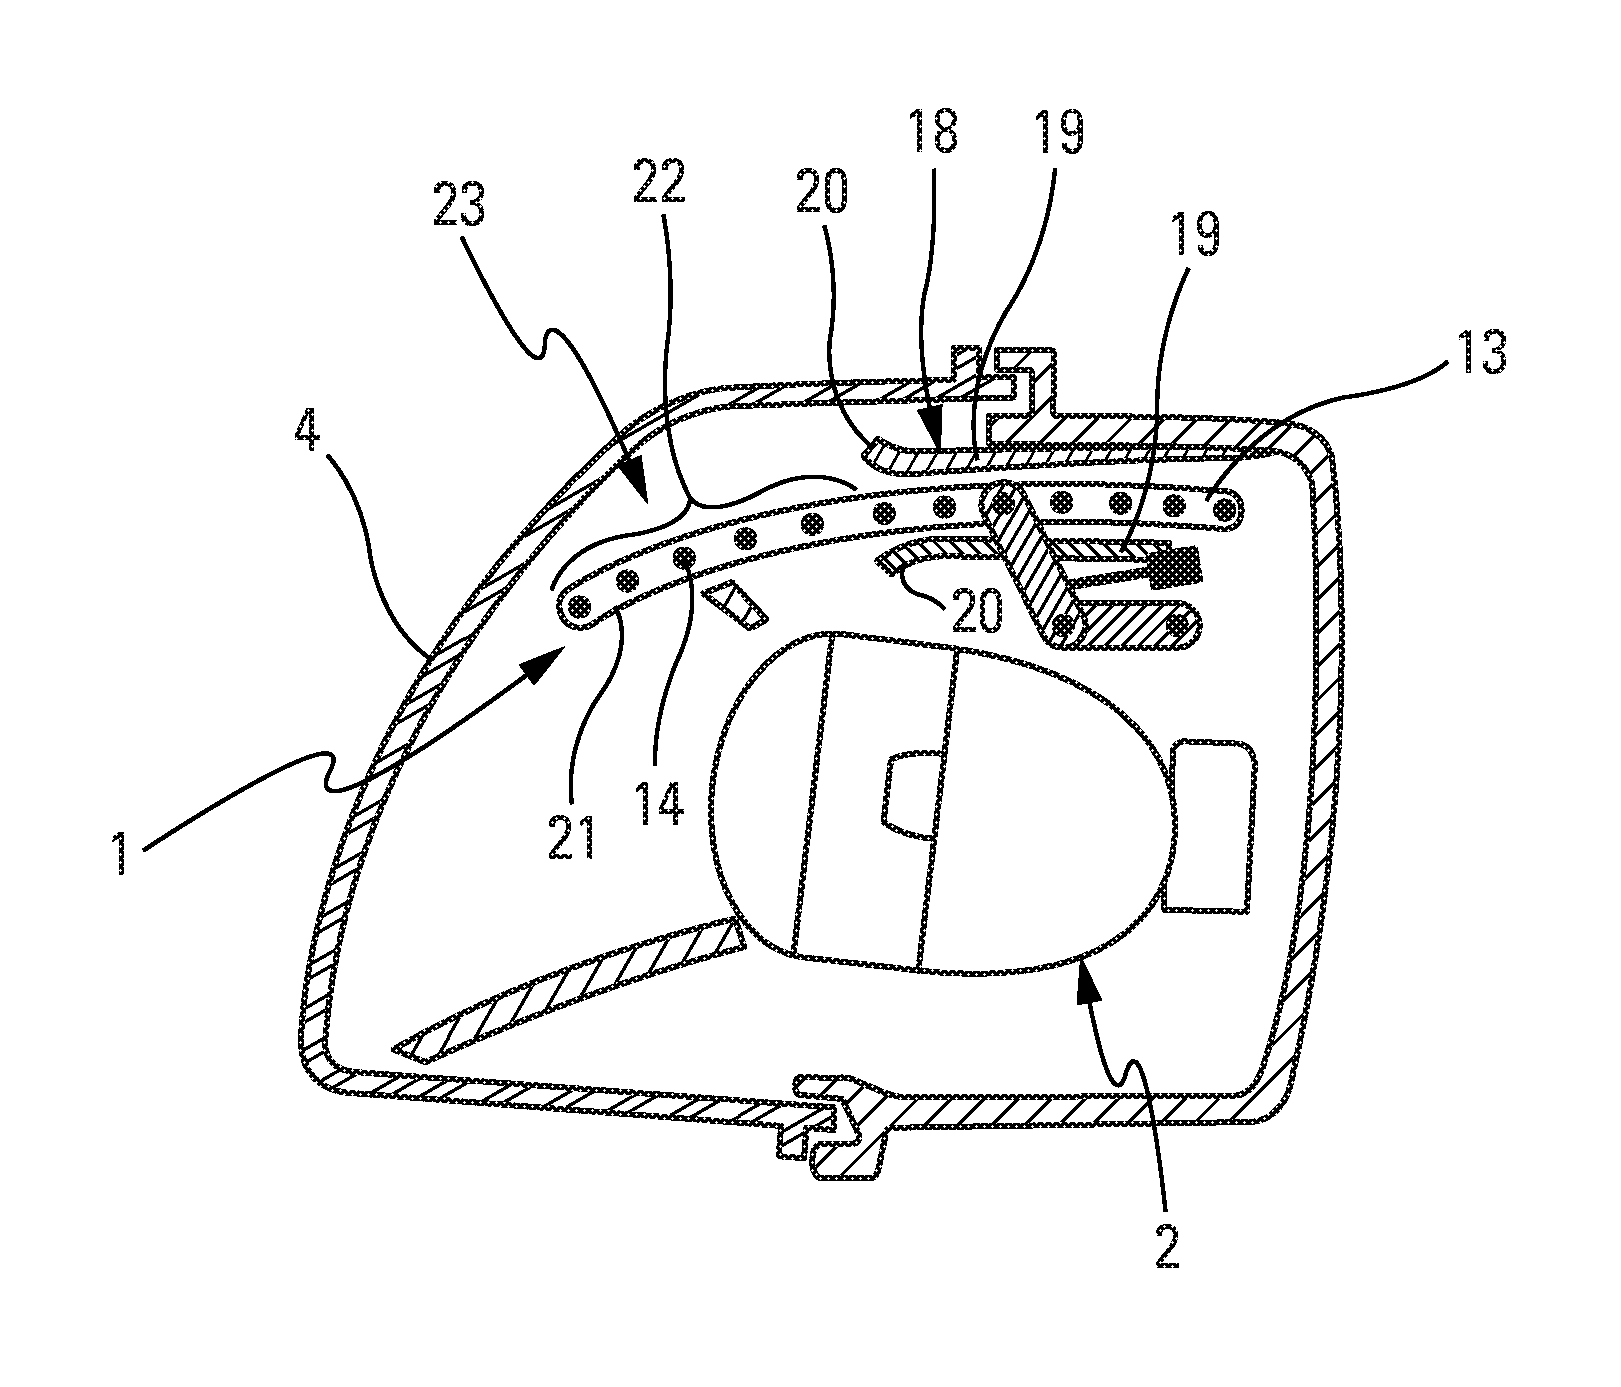 Lighting and/or signalling device with a moveable daytime element